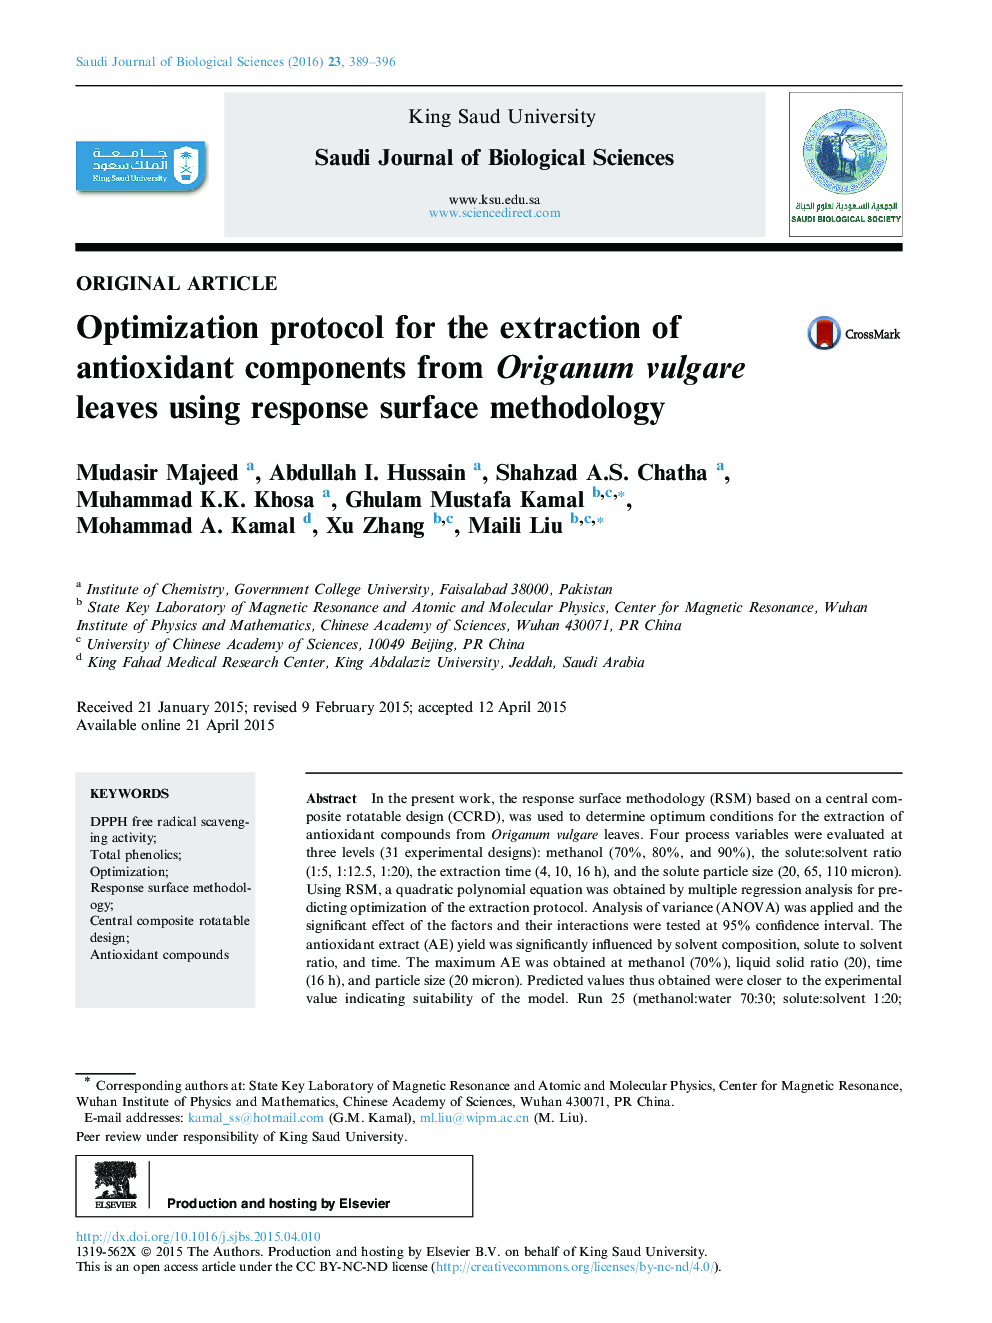 Optimization protocol for the extraction of antioxidant components from Origanum vulgare leaves using response surface methodology 